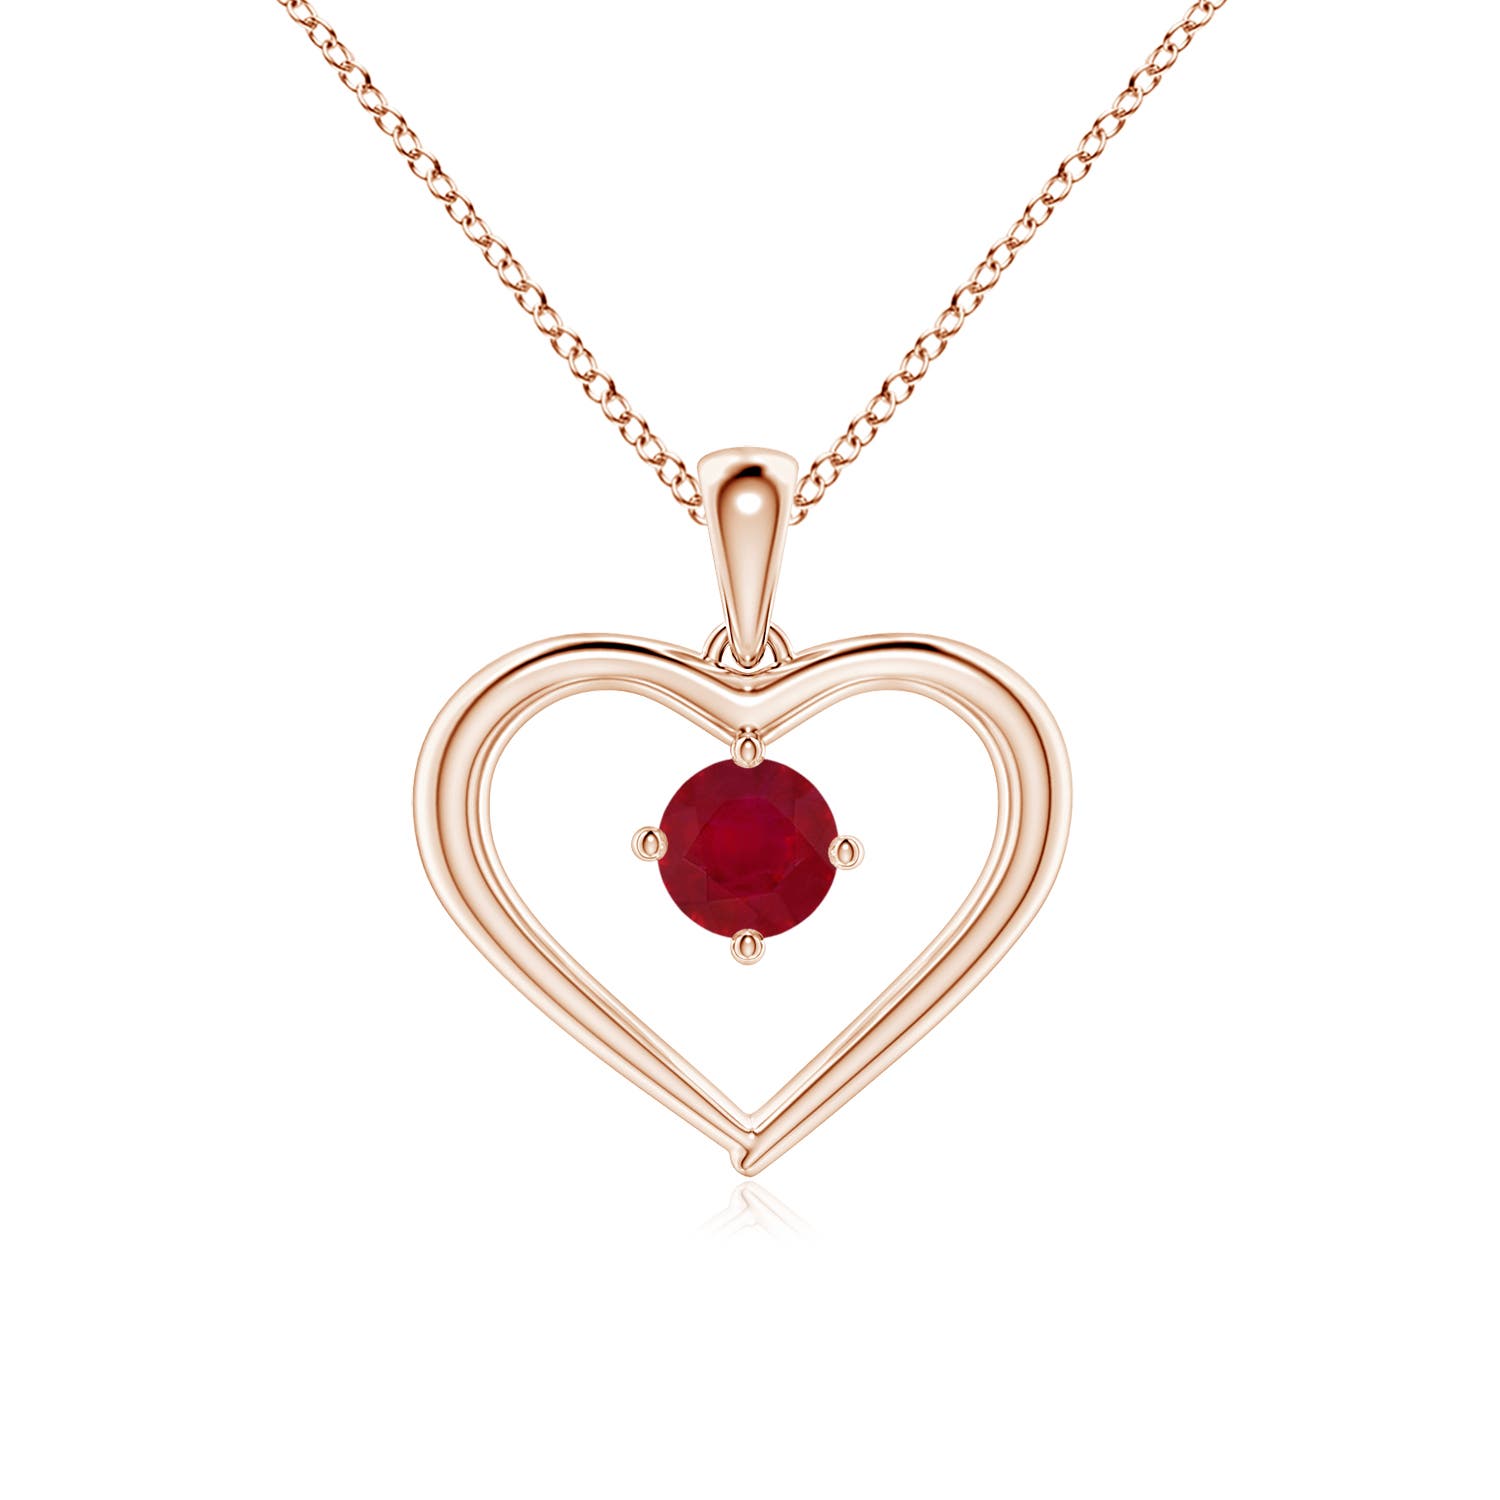 AA - Ruby / 0.34 CT / 14 KT Rose Gold